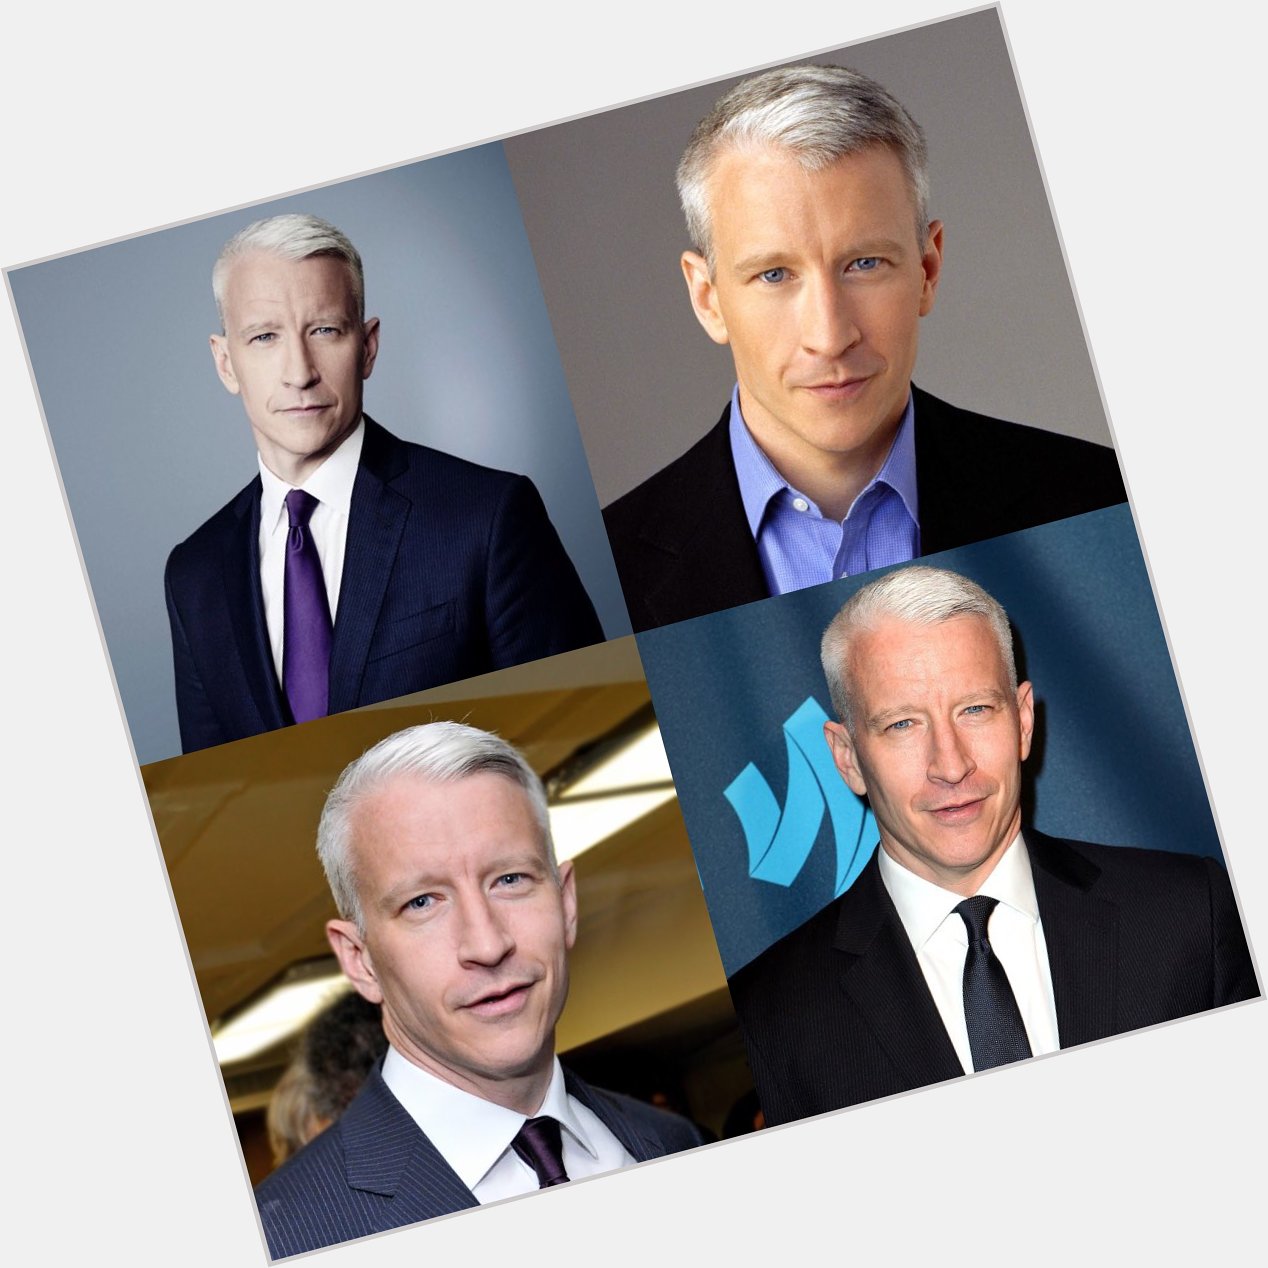 Happy 51 birthday to Anderson cooper. Hope that he has a wonderful birthday.     